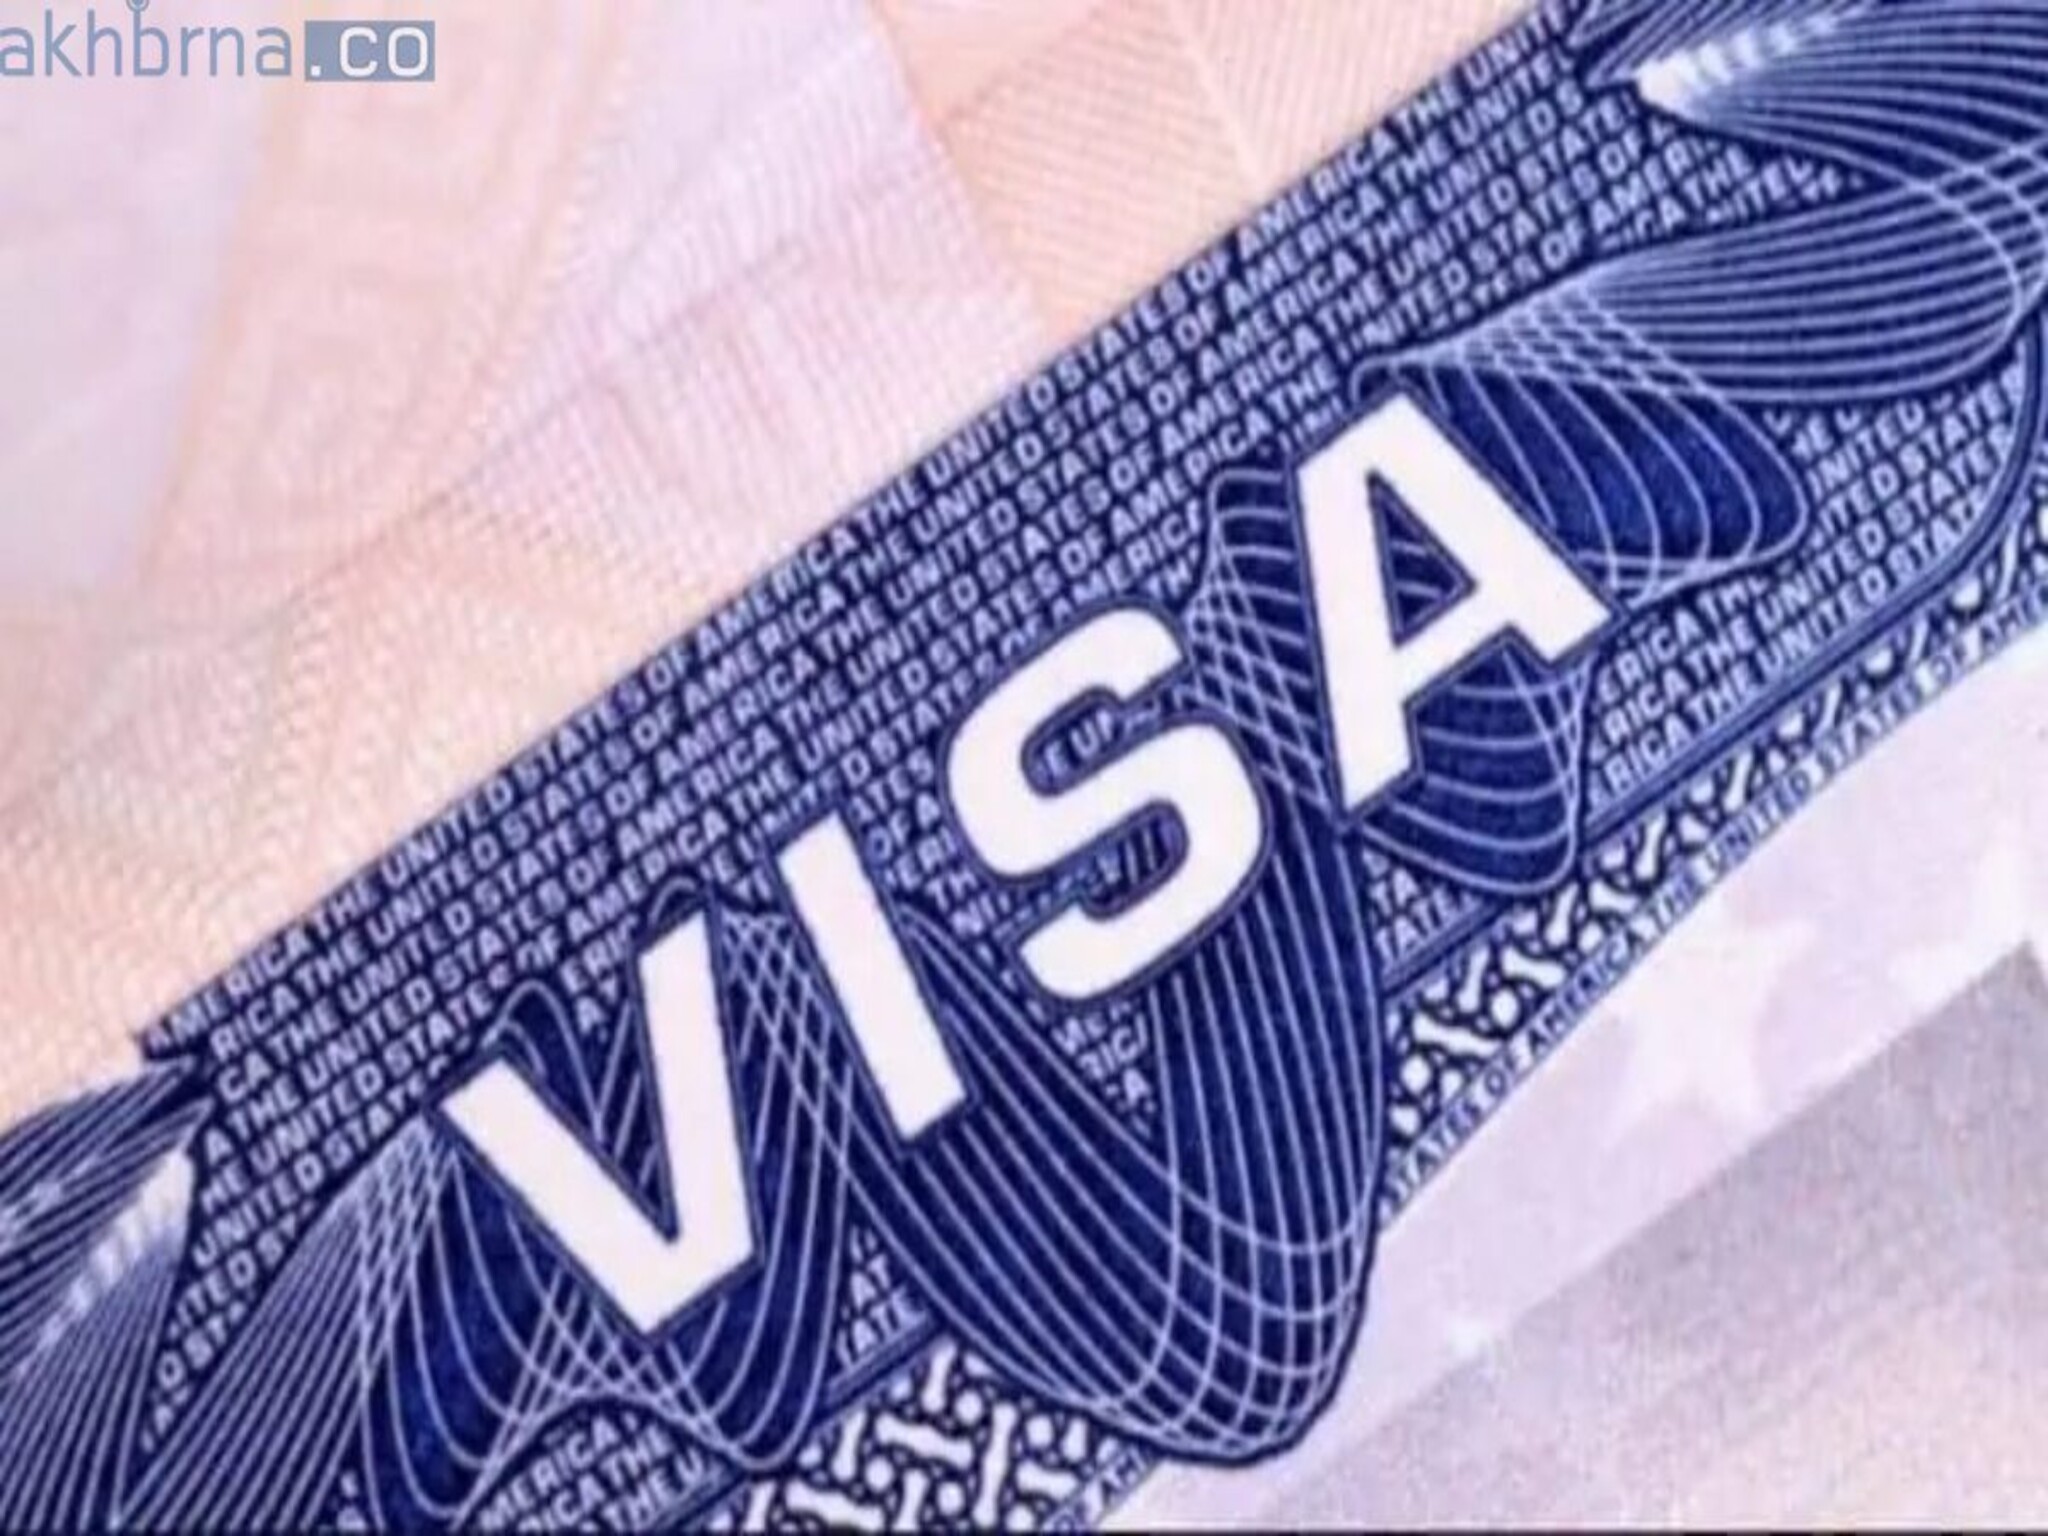 Kuwaiti government introduces a 3-month expat visa amnesty